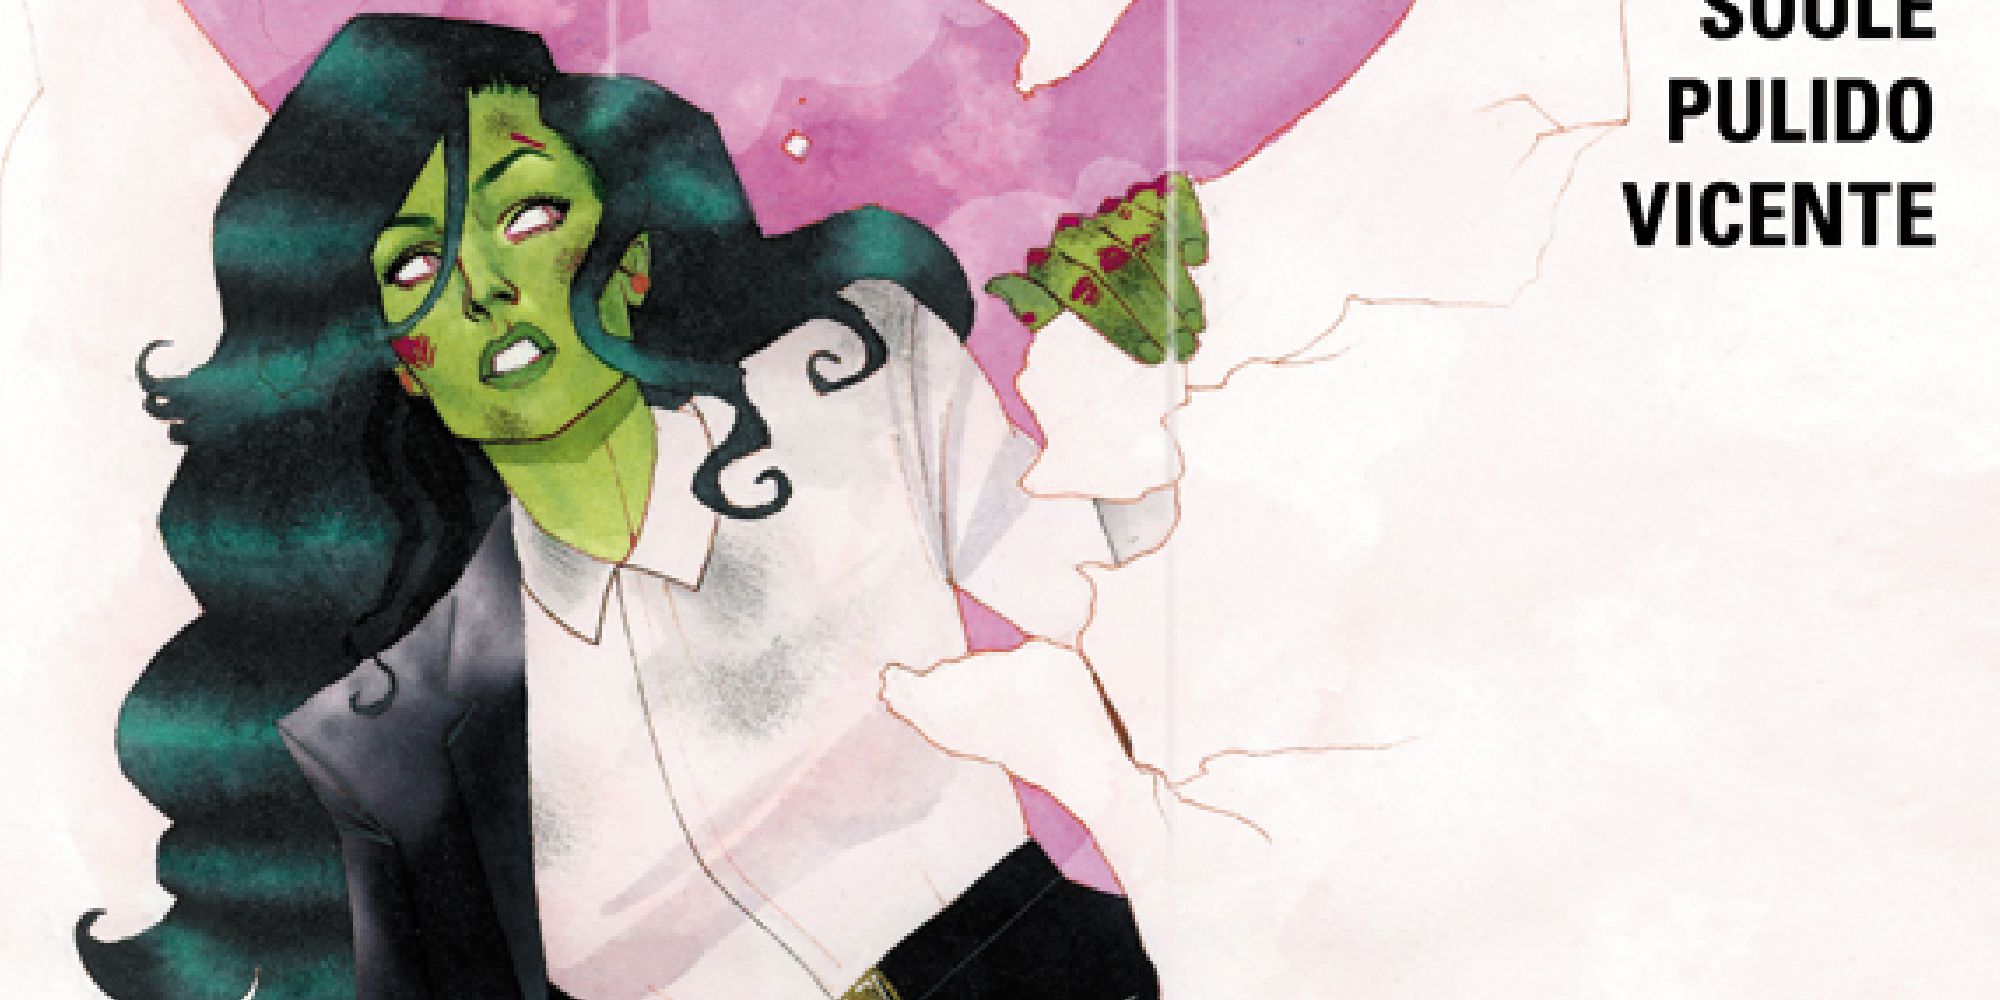 She-Hulk wearing a suit and ripping through the comic pages in the cover of her 2014 solo series